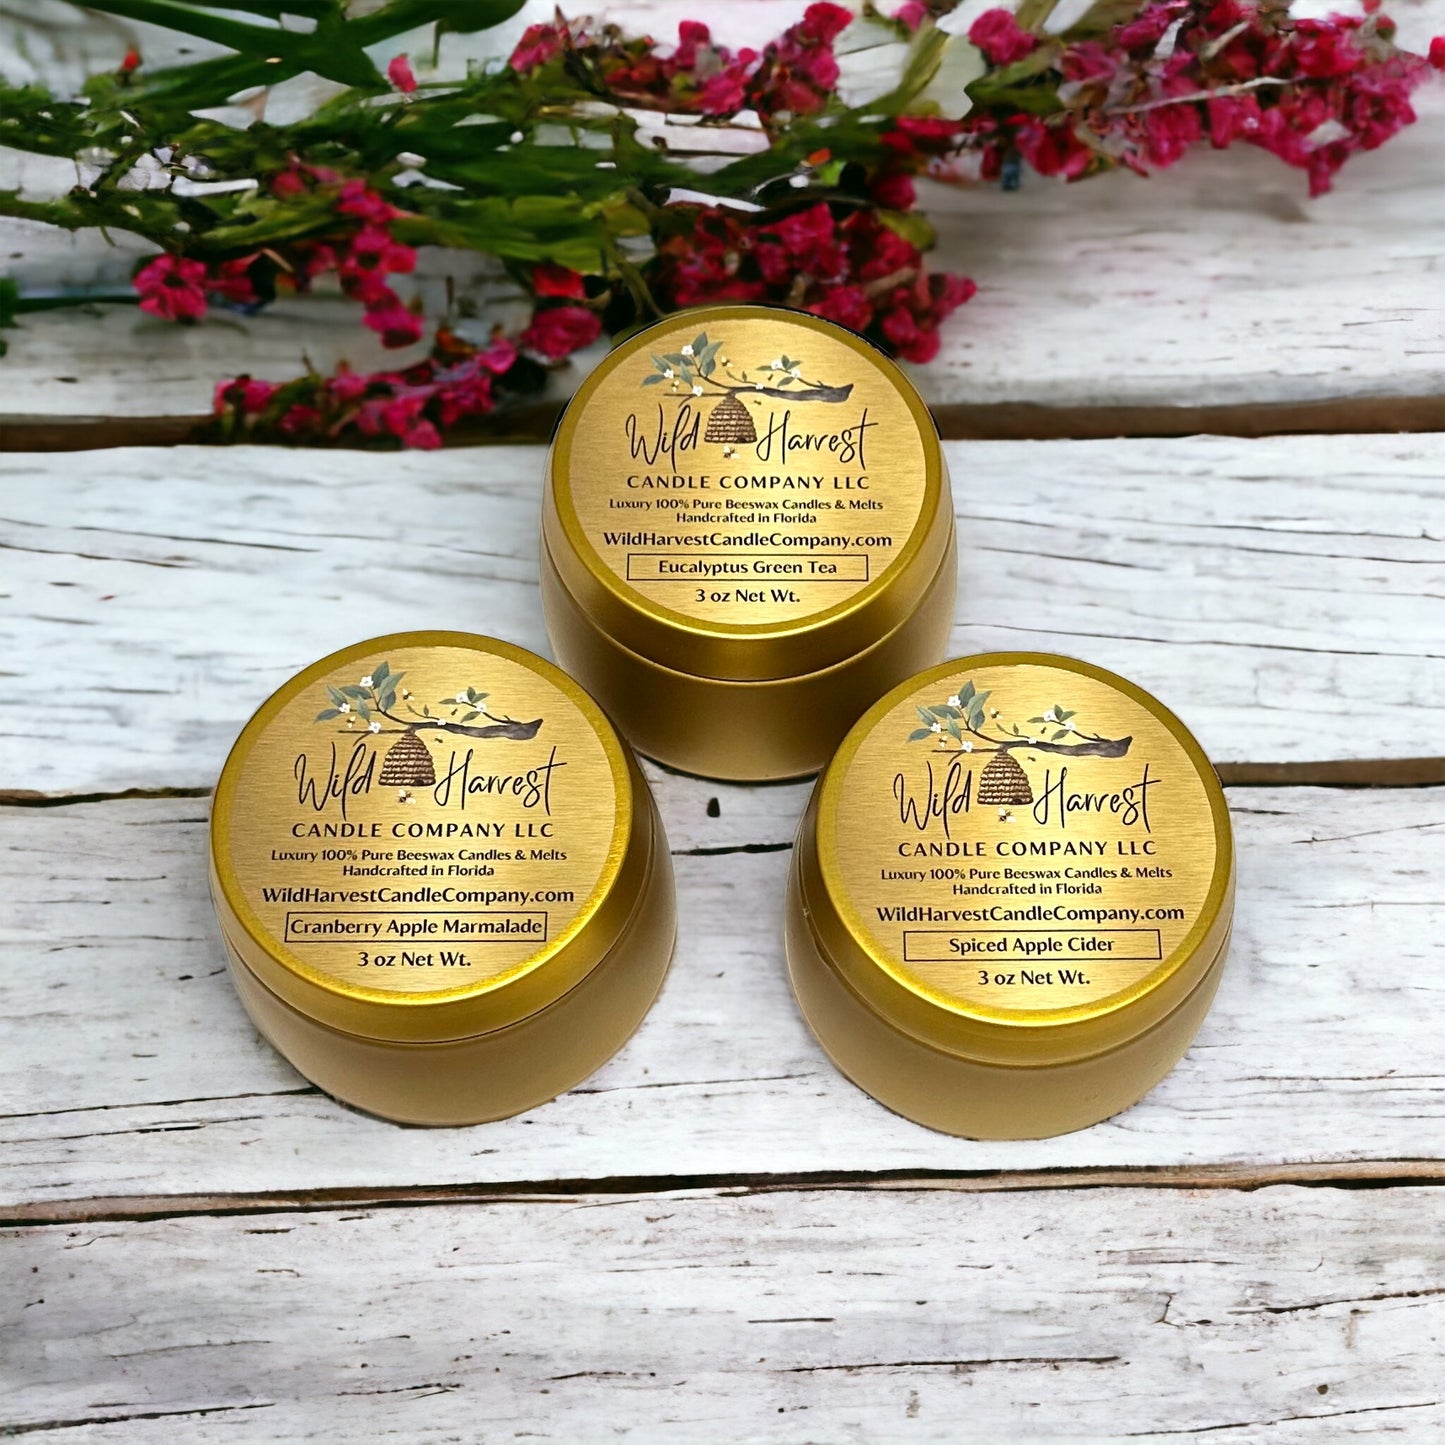 Valentine's Theme Pure Beeswax Candle Tin Bundle - Set of 3 (6 oz Tins)  Choose Your Favorite Scents!